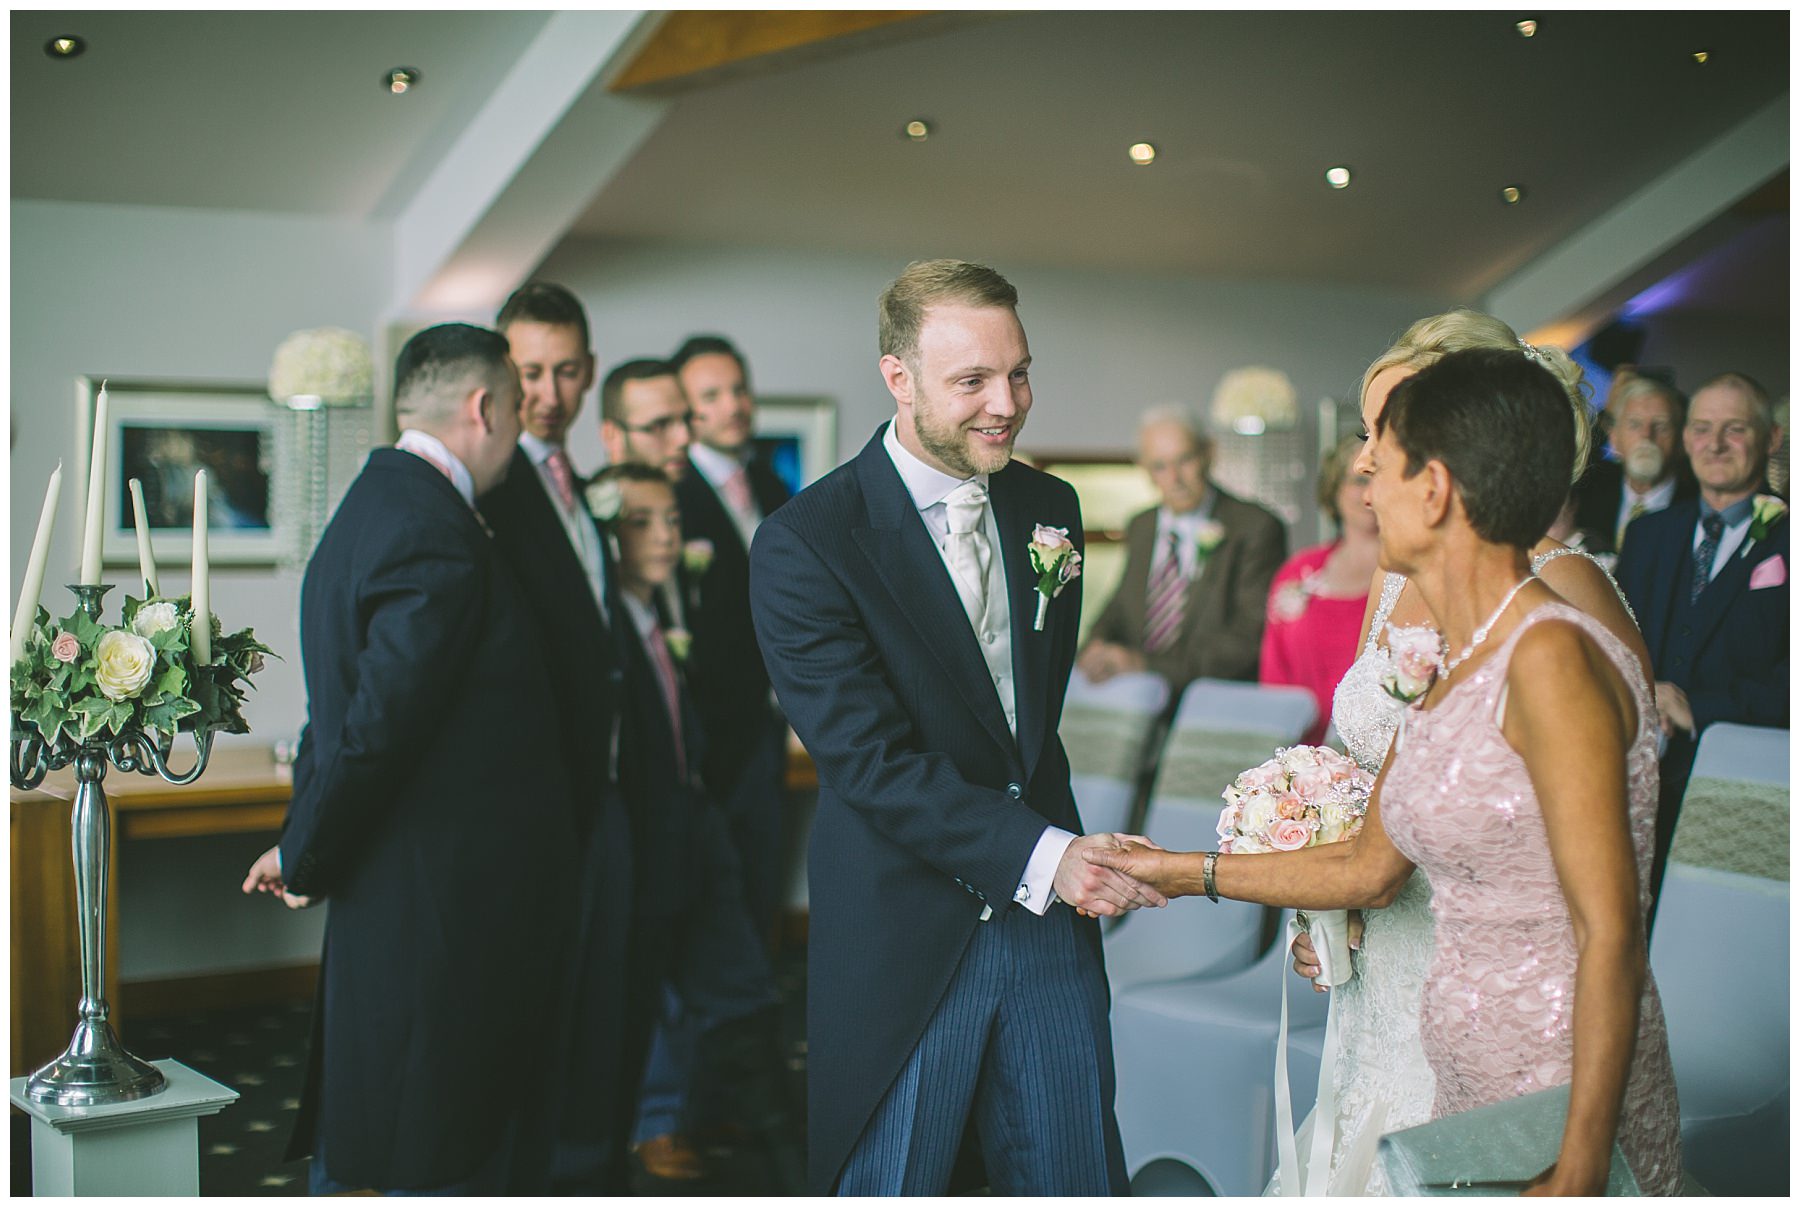 Groom Shakes hands with mother of the bride